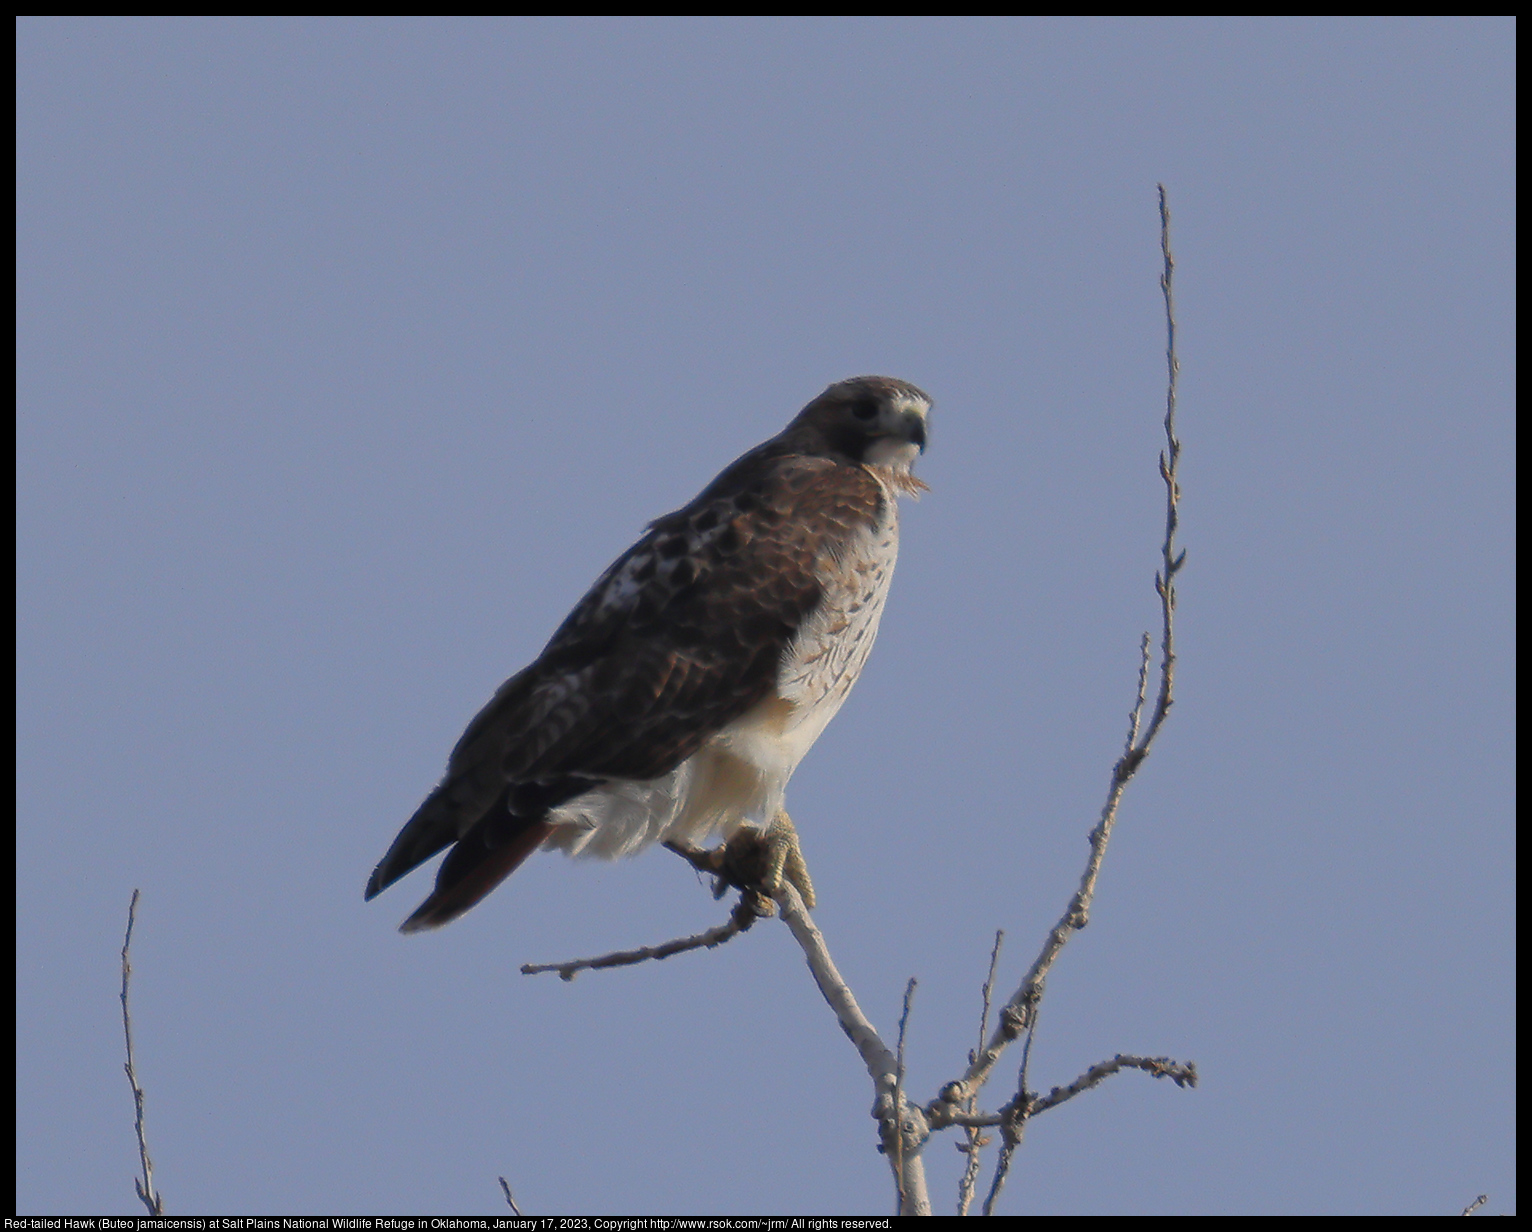 Red-tailed Hawk (Buteo jamaicensis) at Salt Plains National Wildlife Refuge in Oklahoma, January 17, 2023